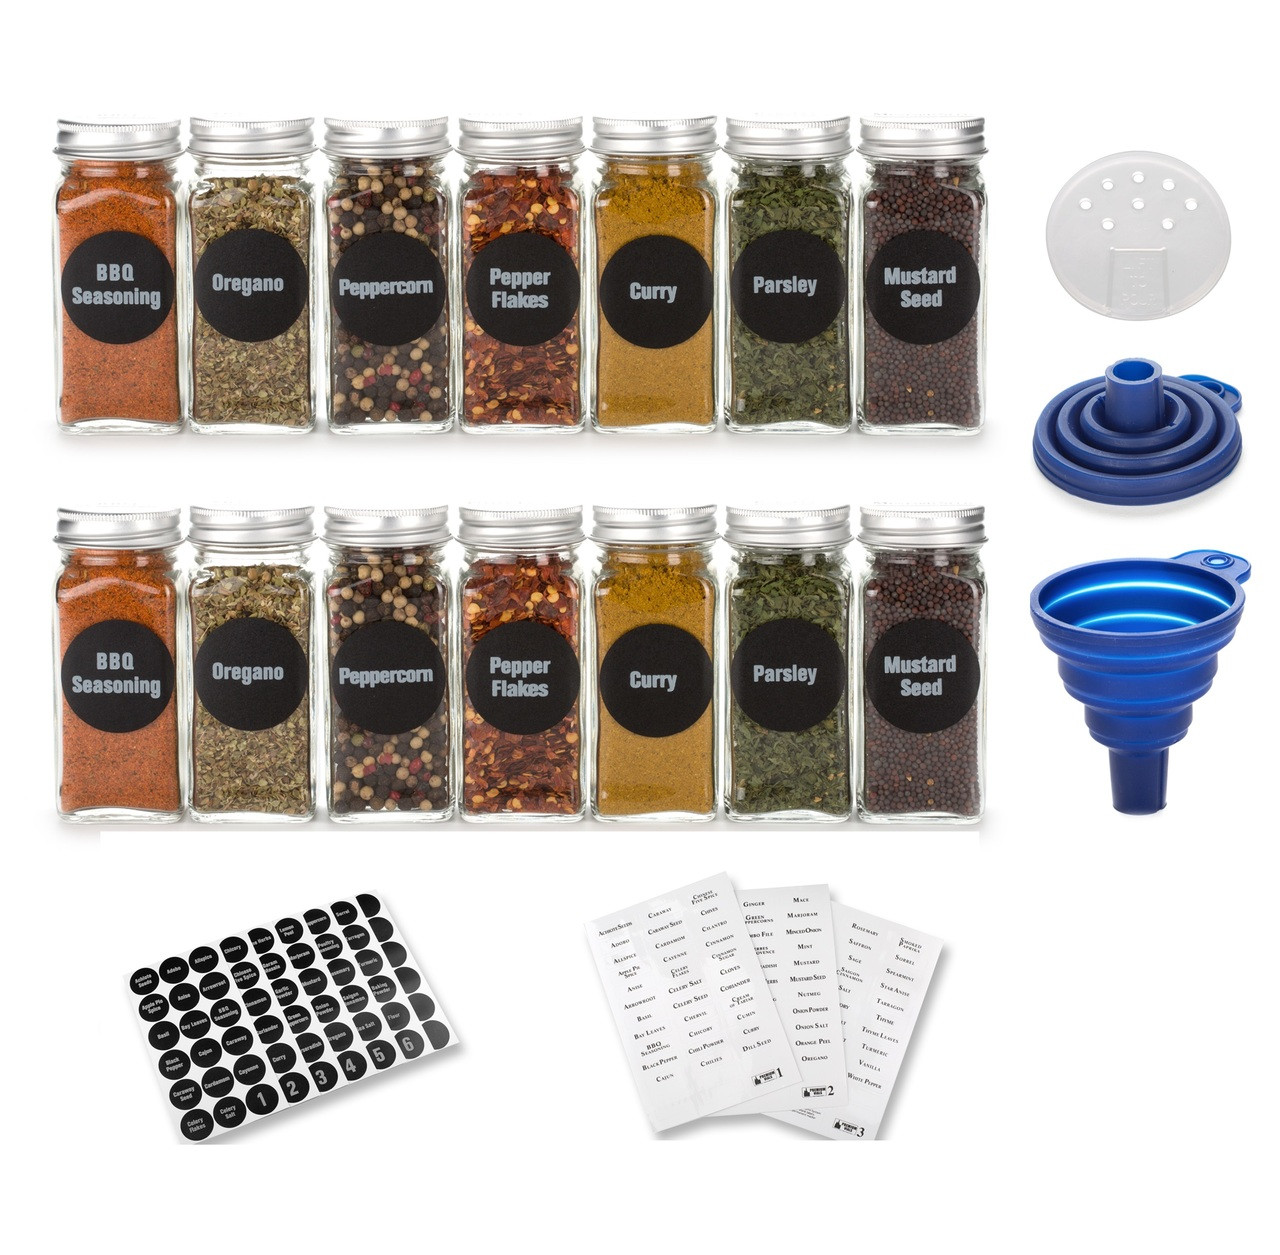 25 Glass Spice Jars with 396 Spice Labels, Chalk Marker and Funnel Complete  Set. 25 Square Glass Jars 4OZ, Airtight Cap, Pour/sift Shaker Lid